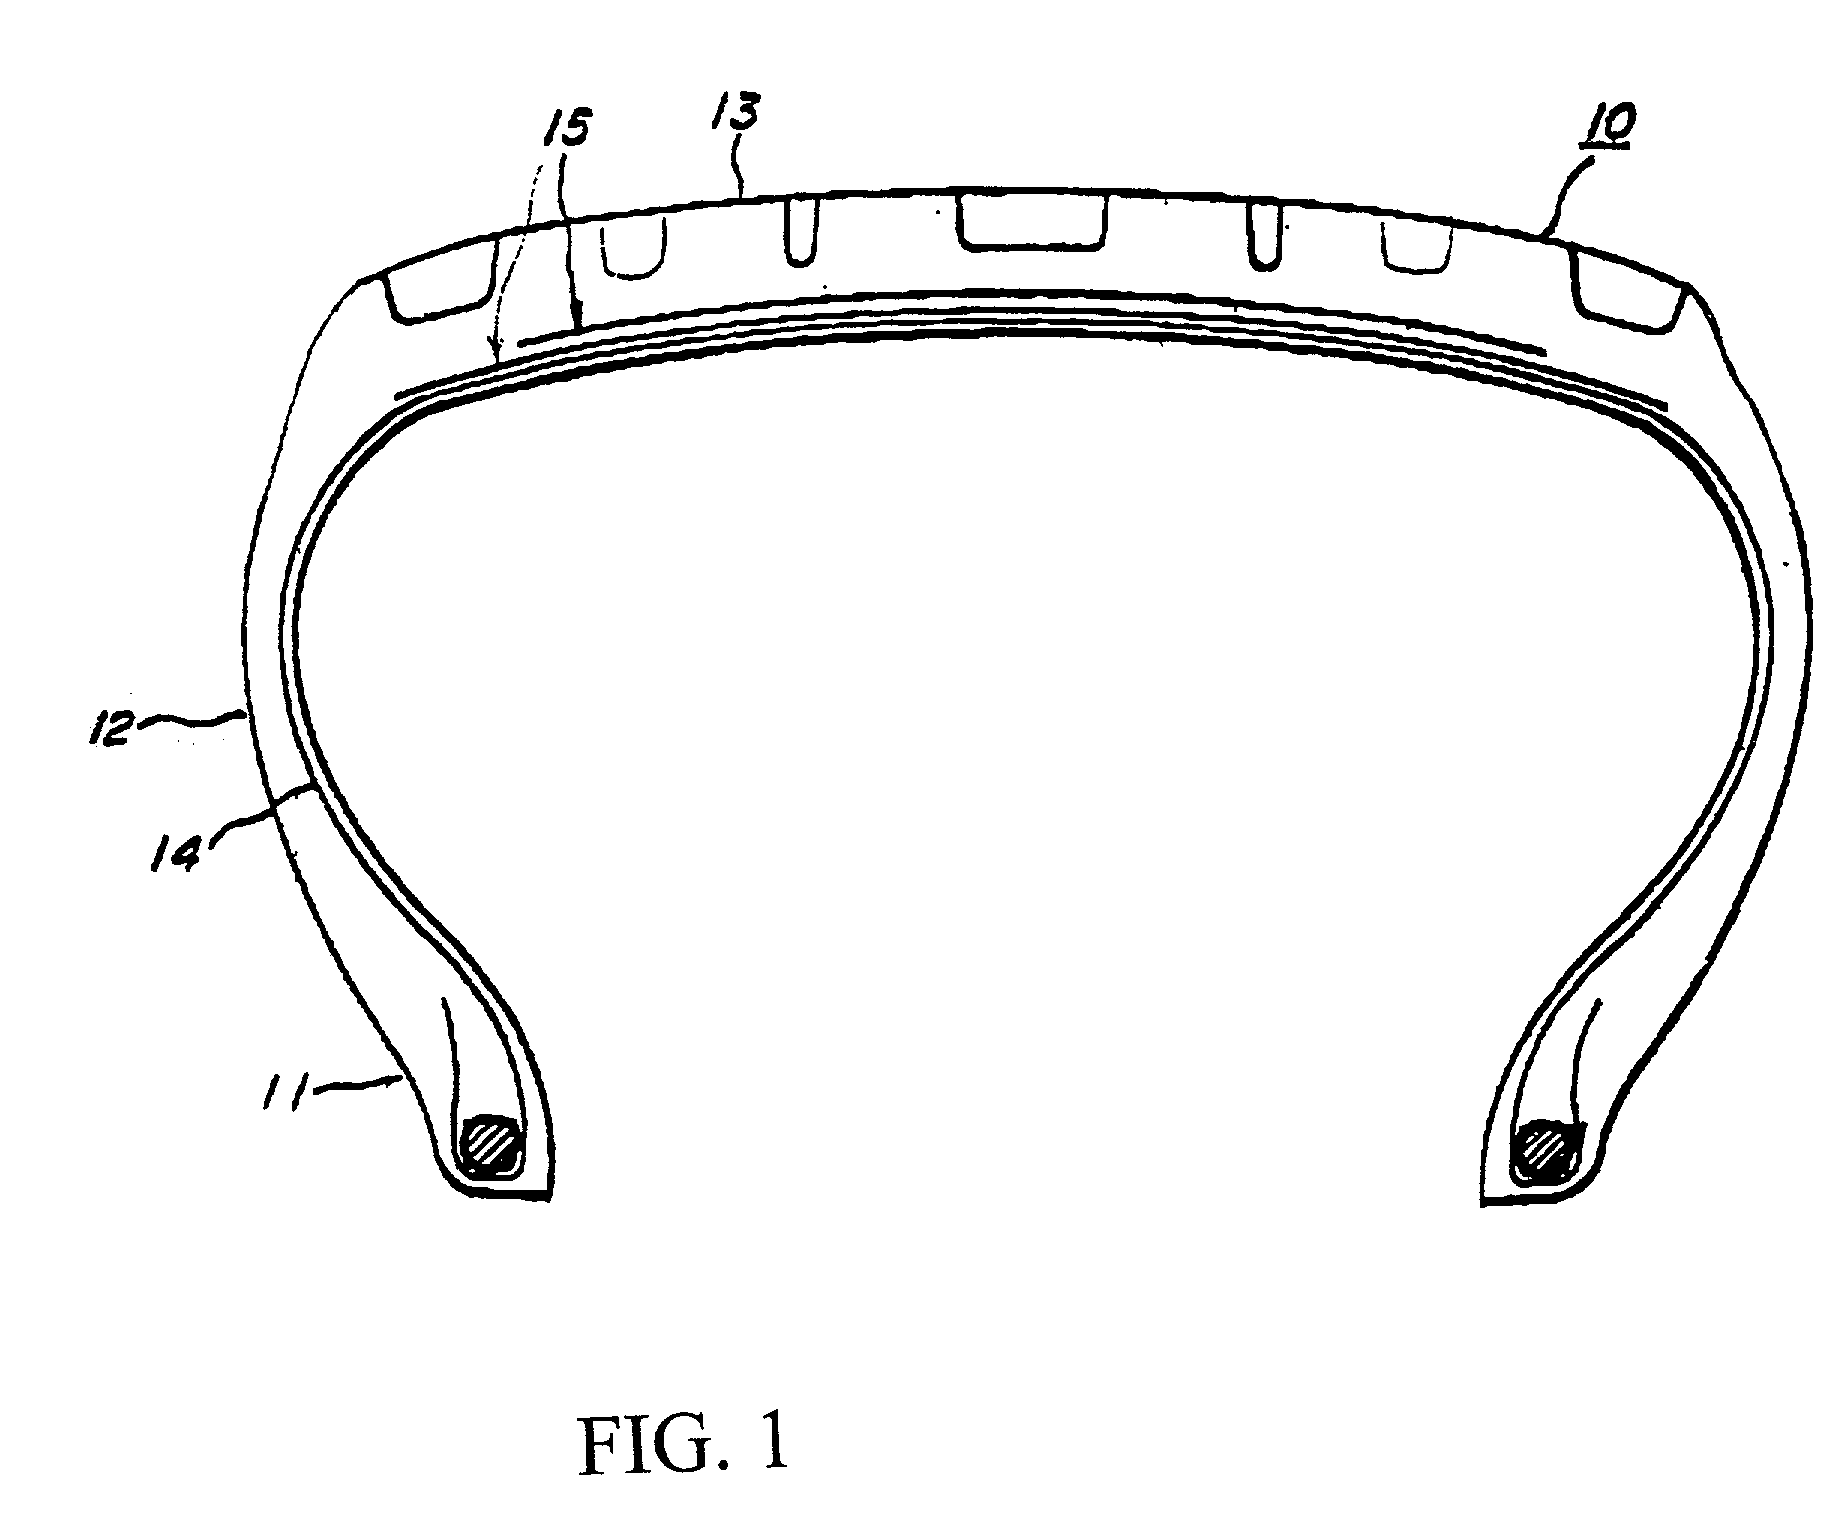 Tire reinforced by an elongate composite element of the monofilament type, and such element